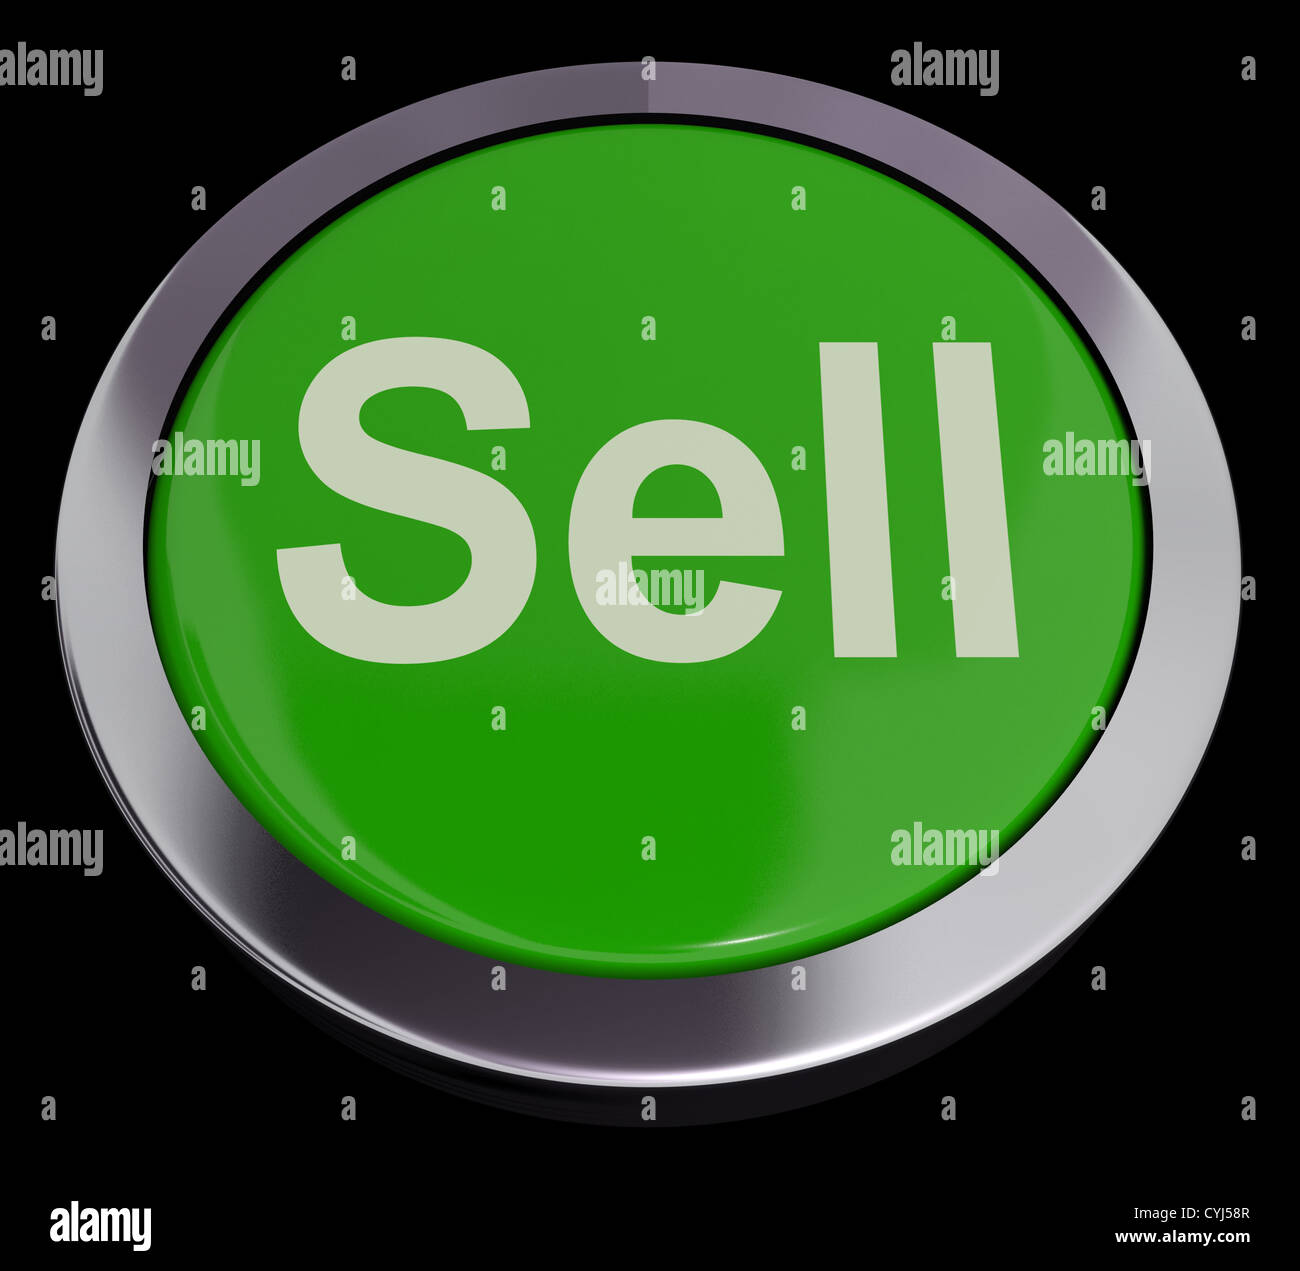 Sell Button Green Showing Sales And Business Stock Photo